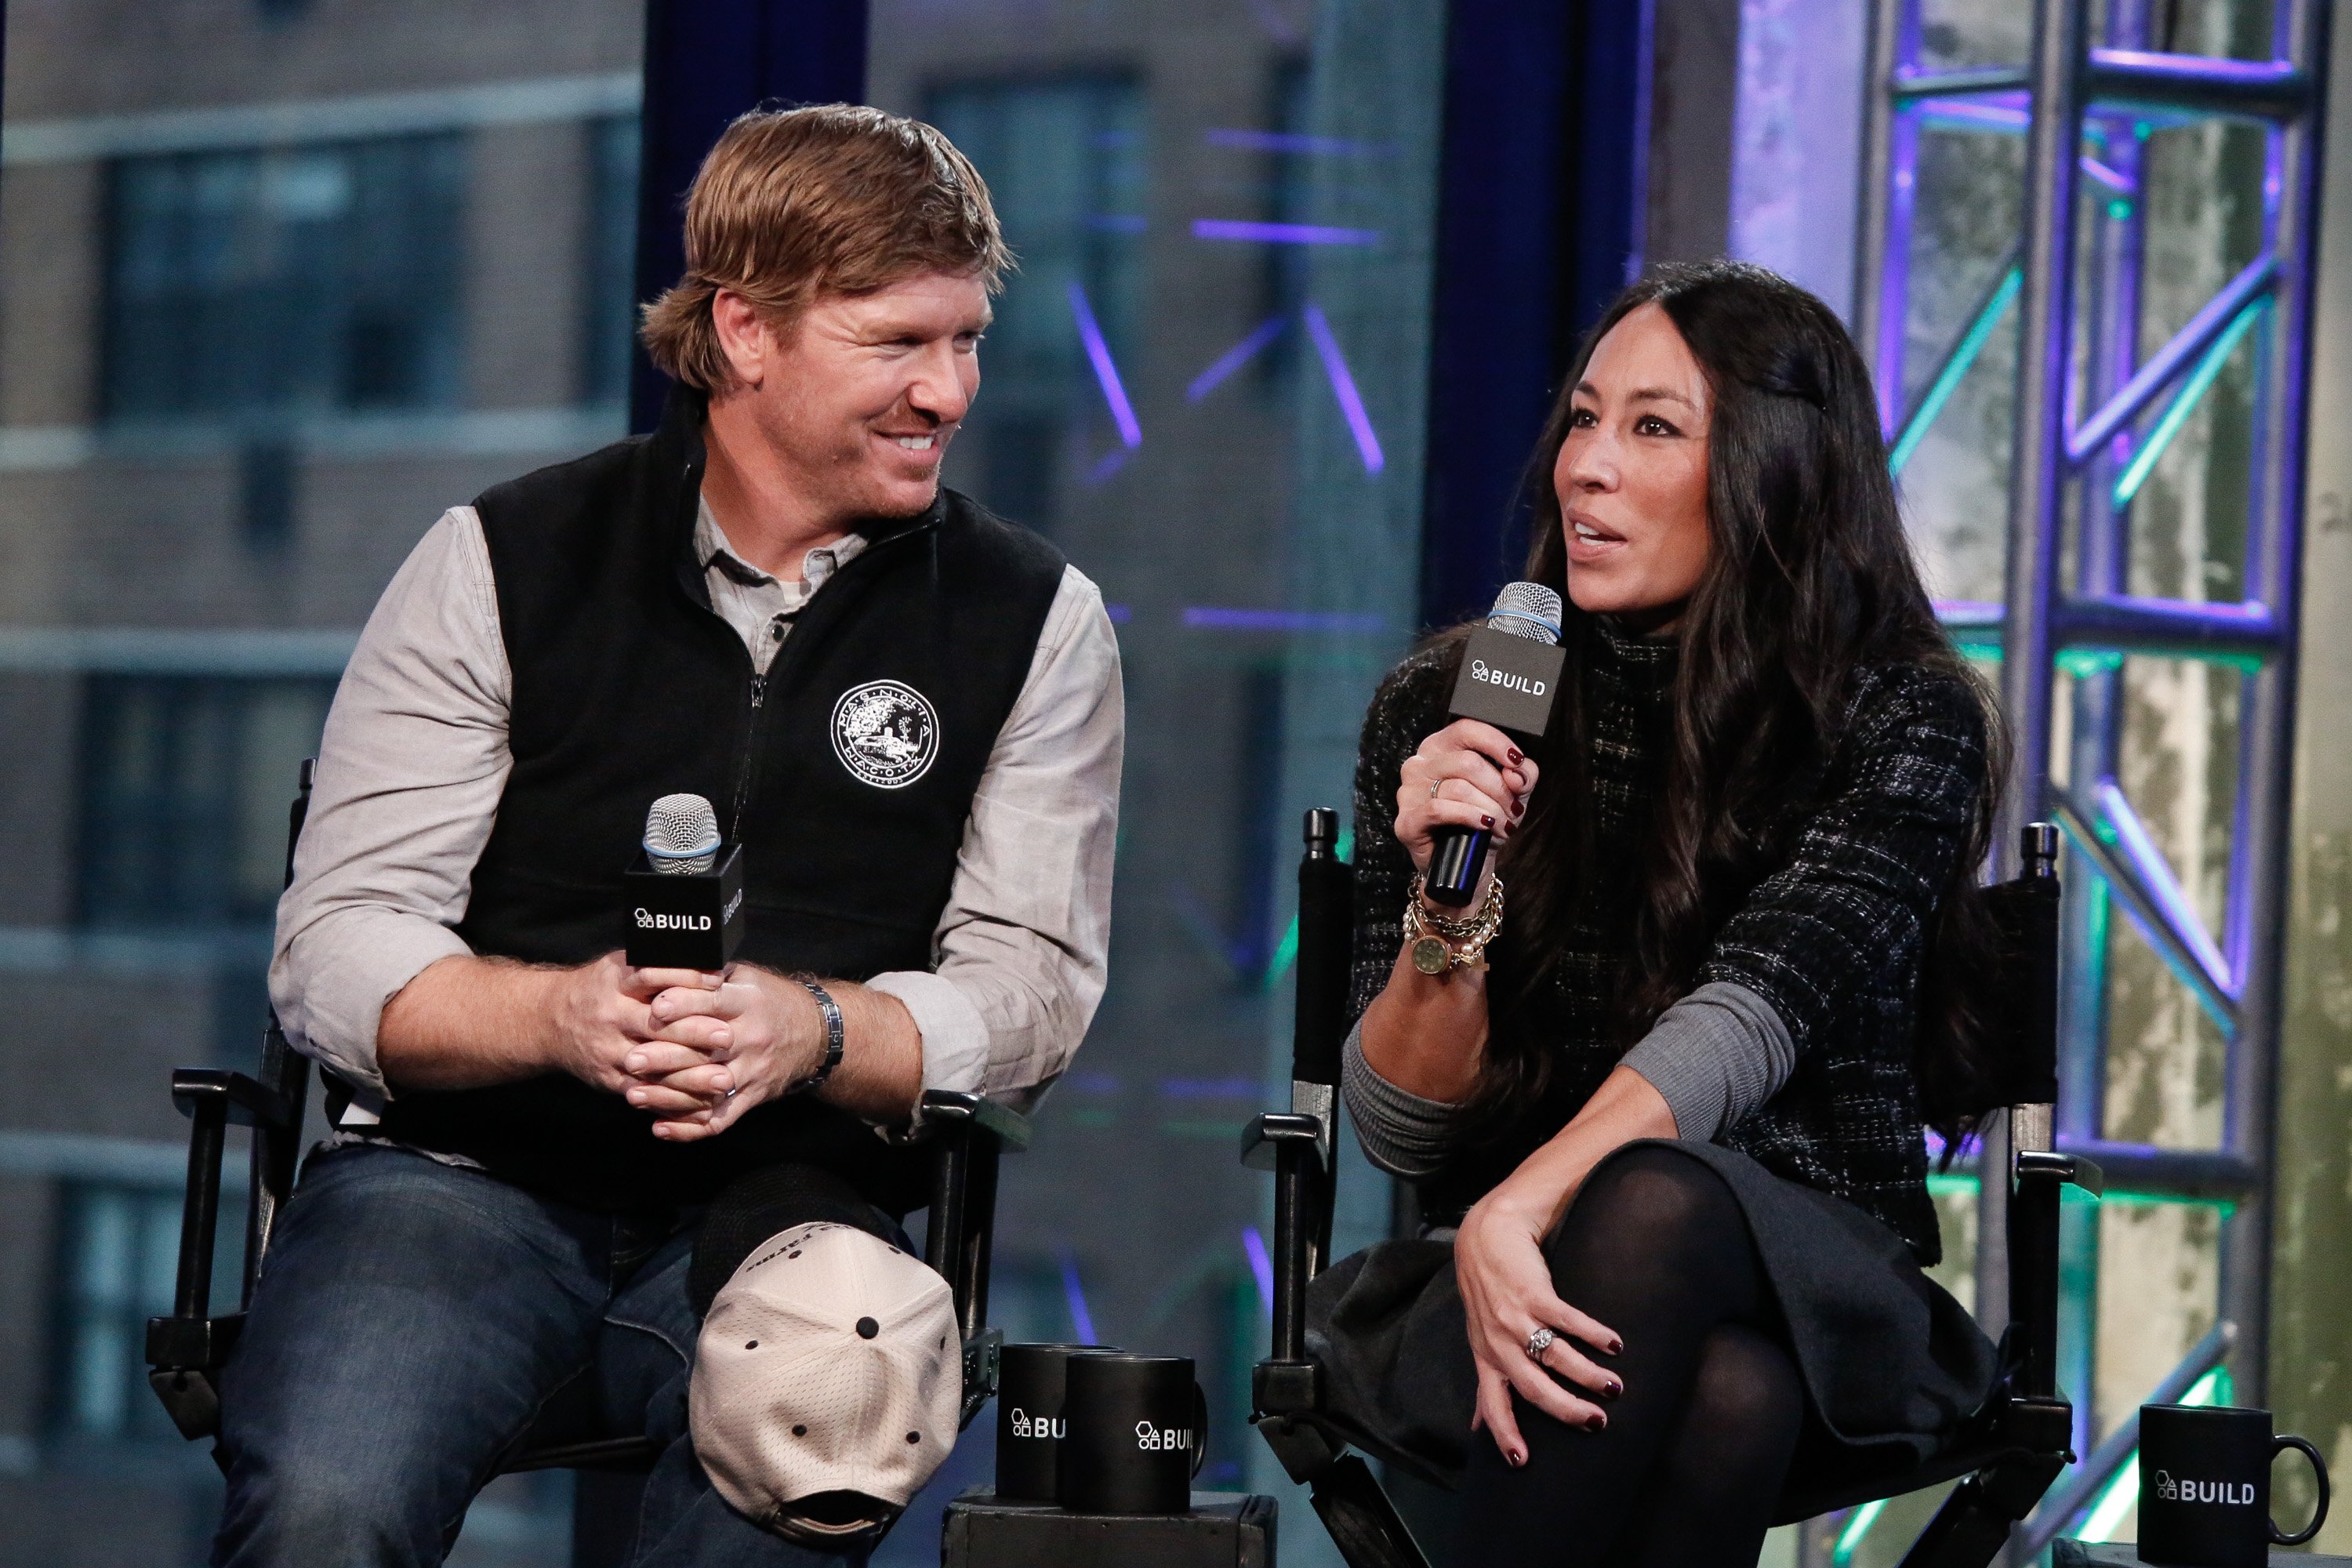 Chip and Joanna Gaines |  Rob Kim/Getty Images